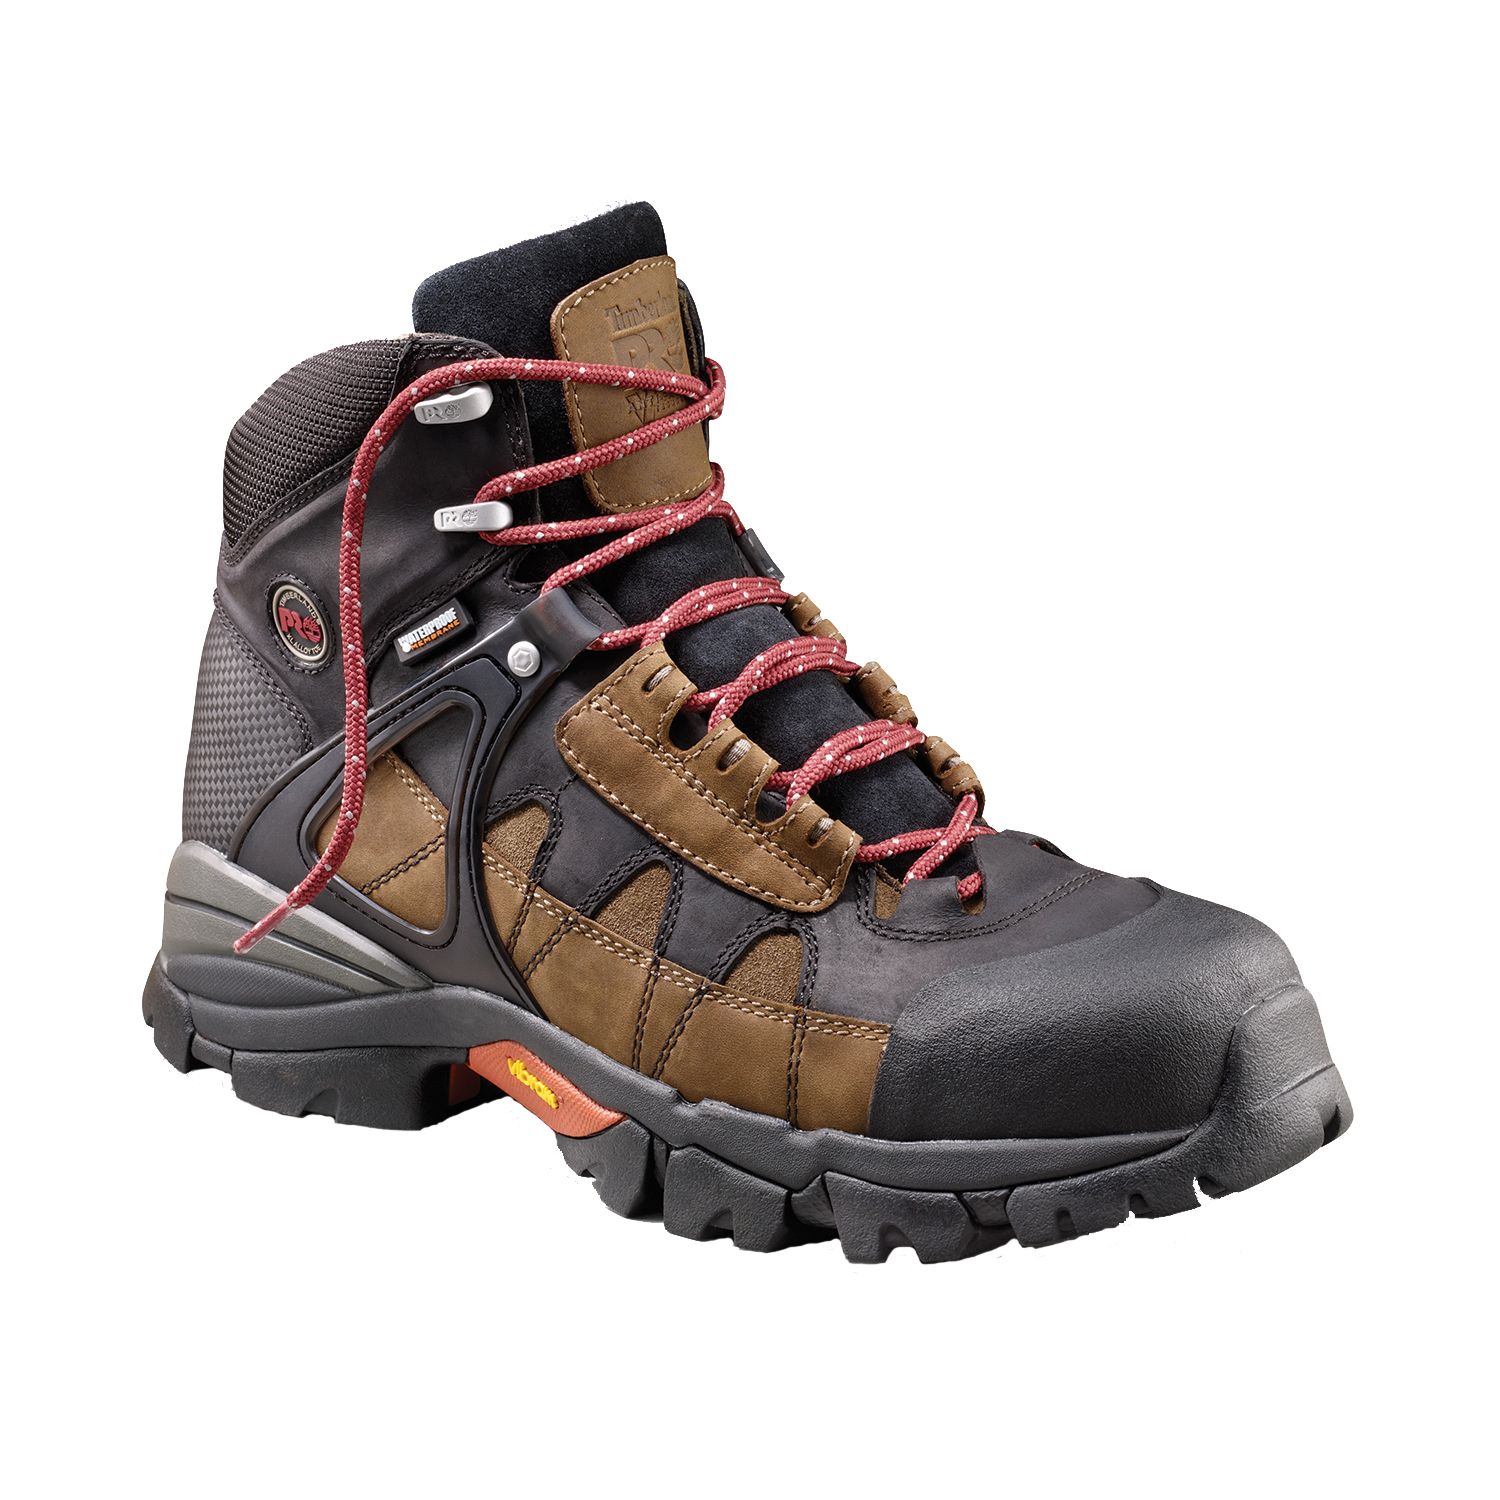 Timberland PRO Men's 6” Hyperion Alloy Toe Work Boots